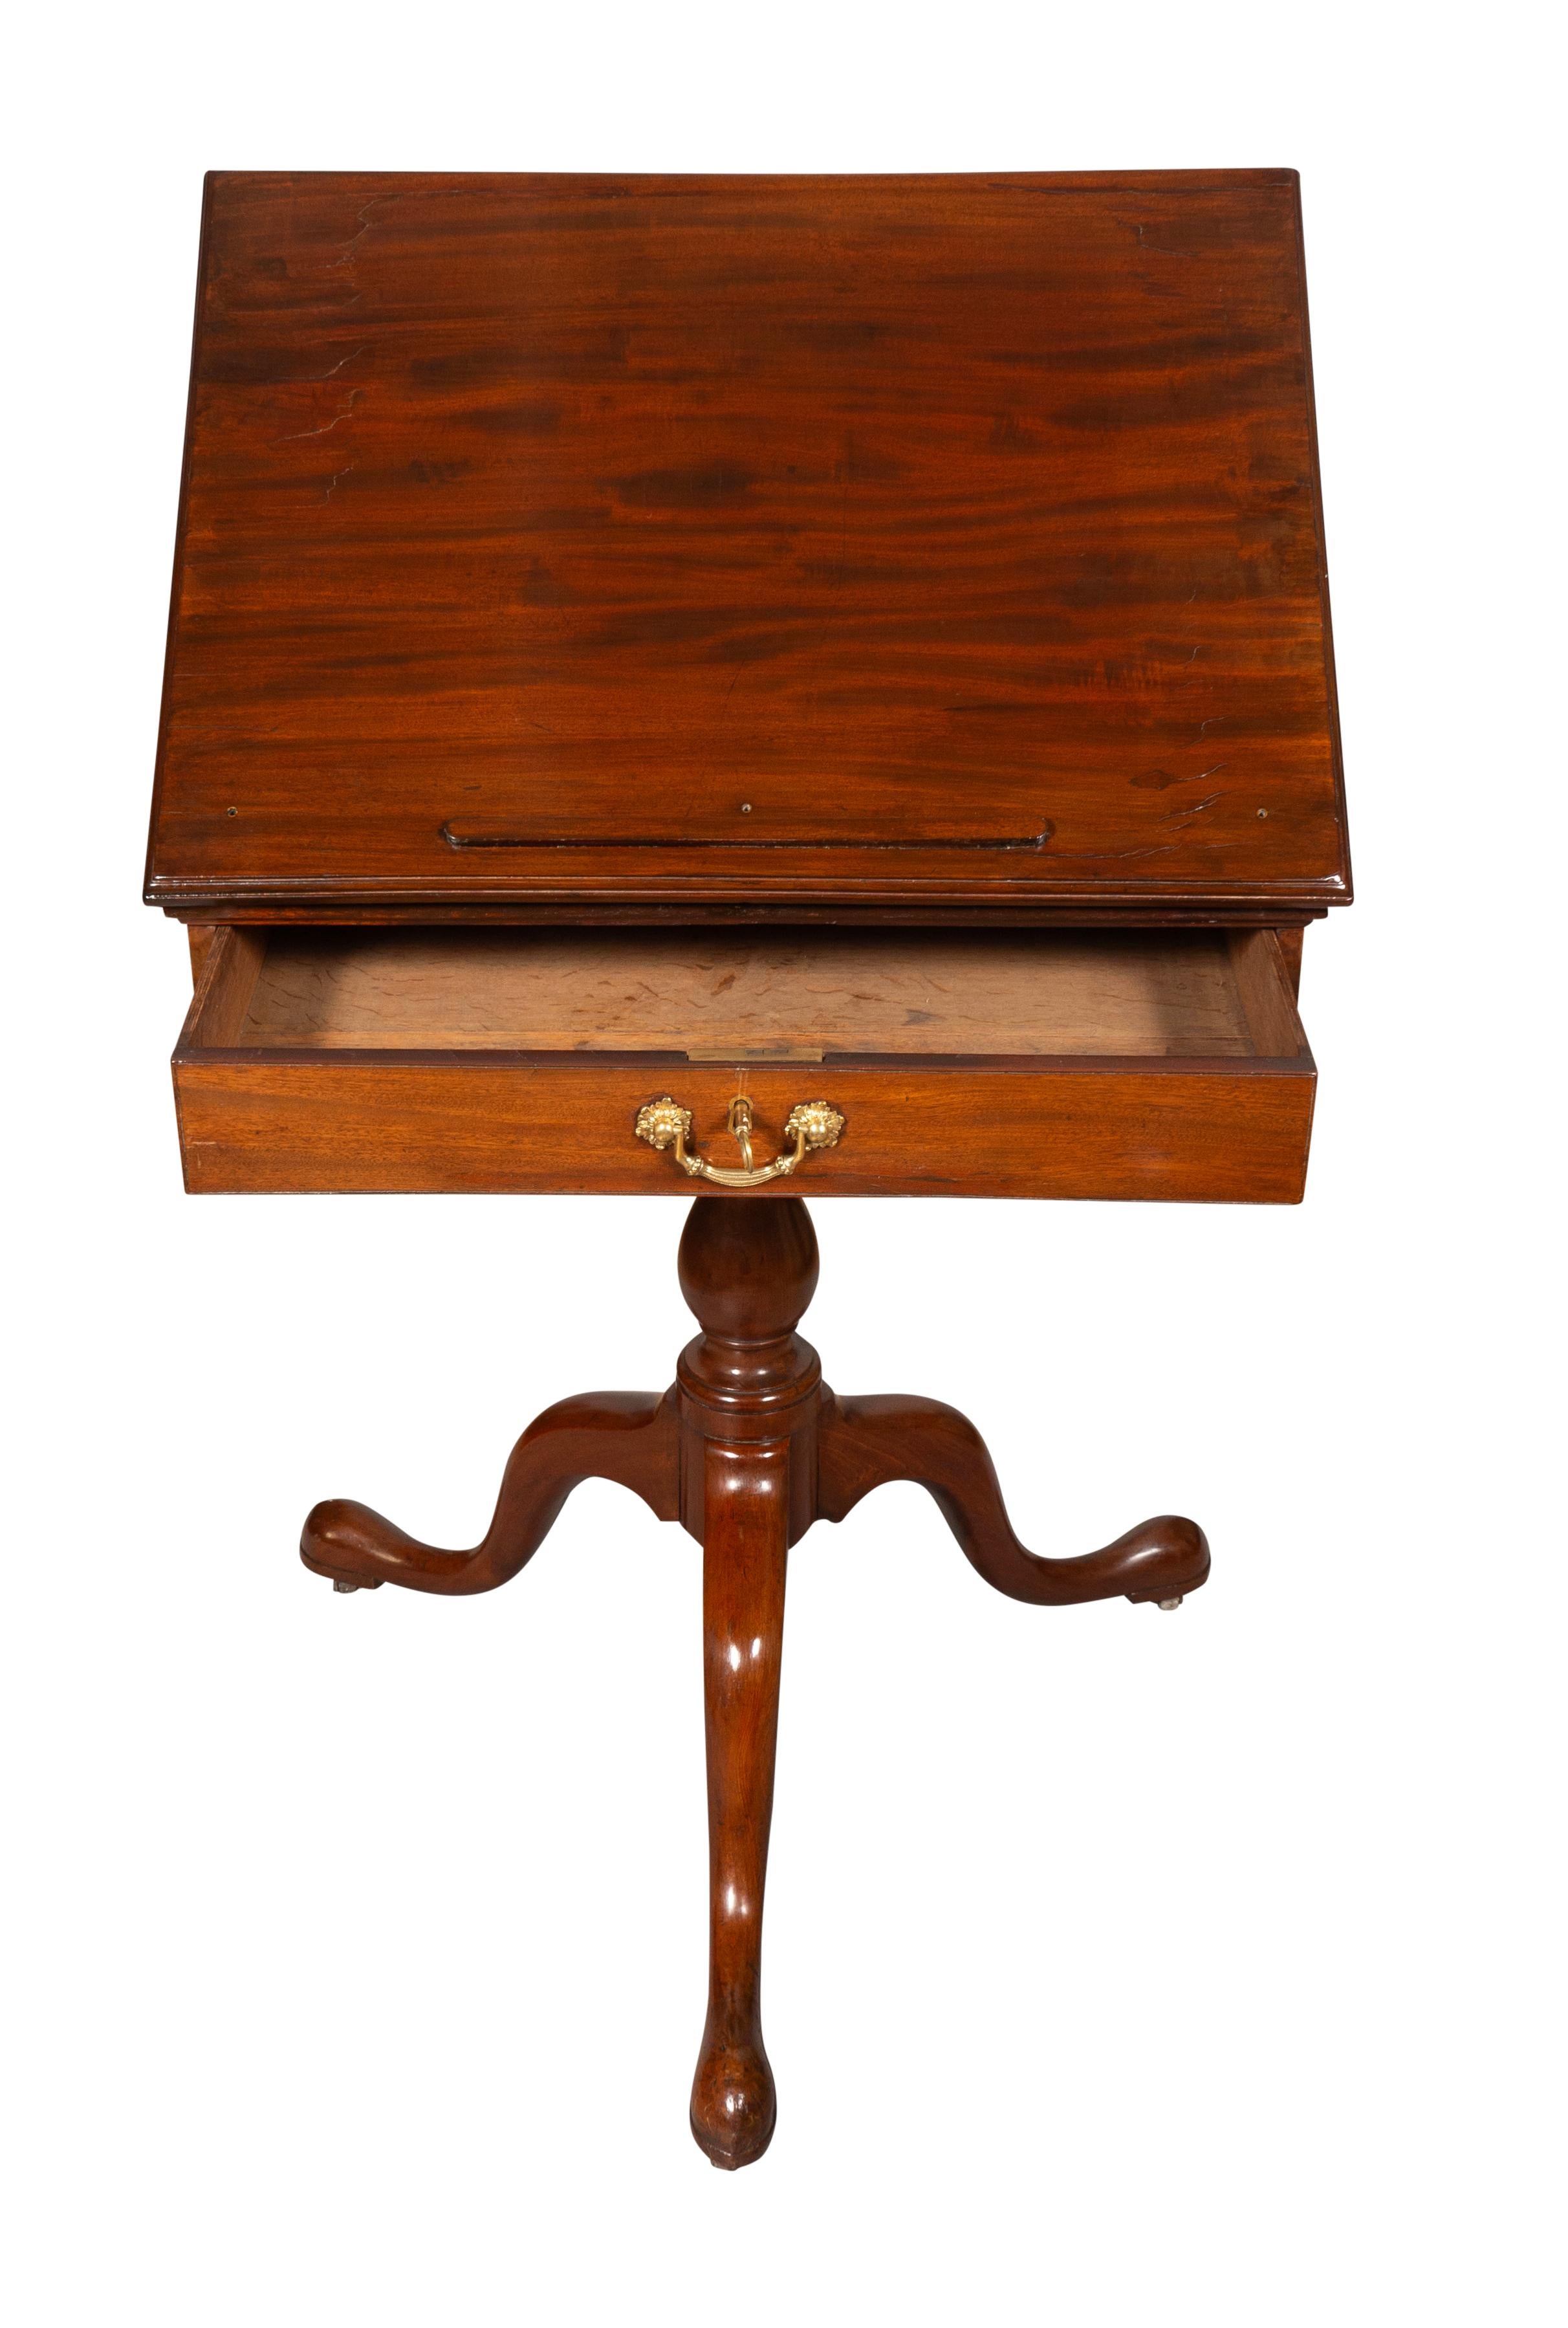 Rectangular hinged top over a drawer. With turned baluster support ending on three cabriole legs.